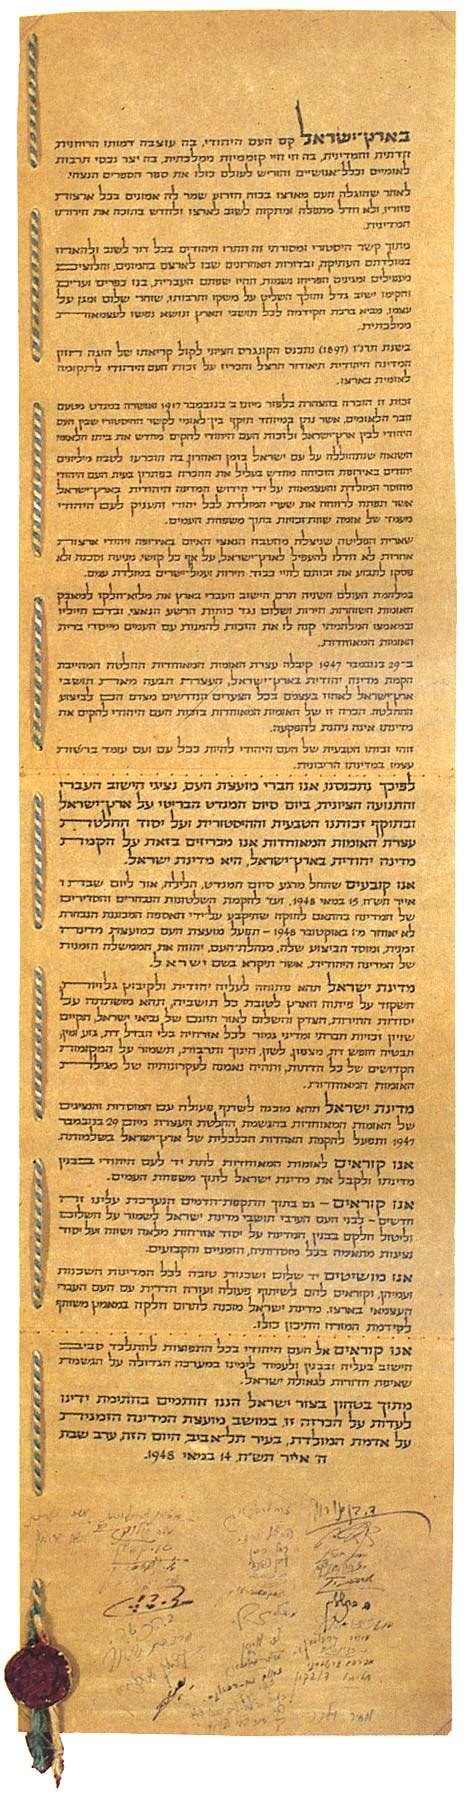 File:Israel Declaration of Independence.jpg - Wikimedia Commons